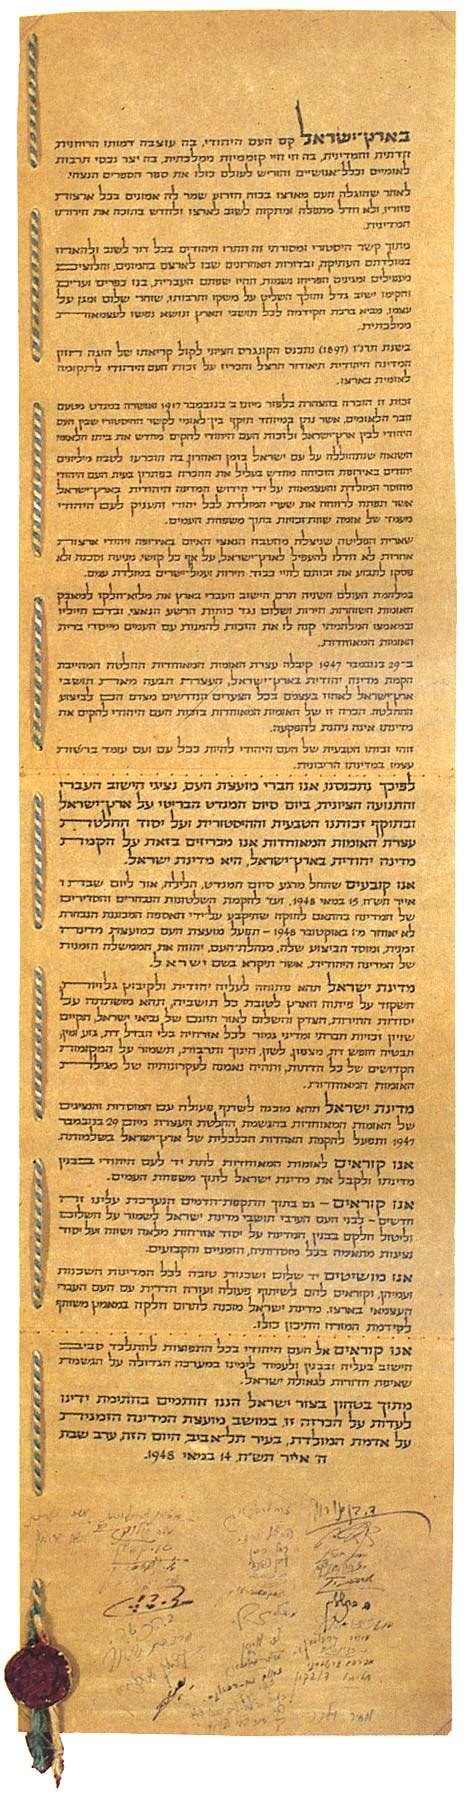 File:Israel Declaration of Independence.jpg - Wikimedia Commons